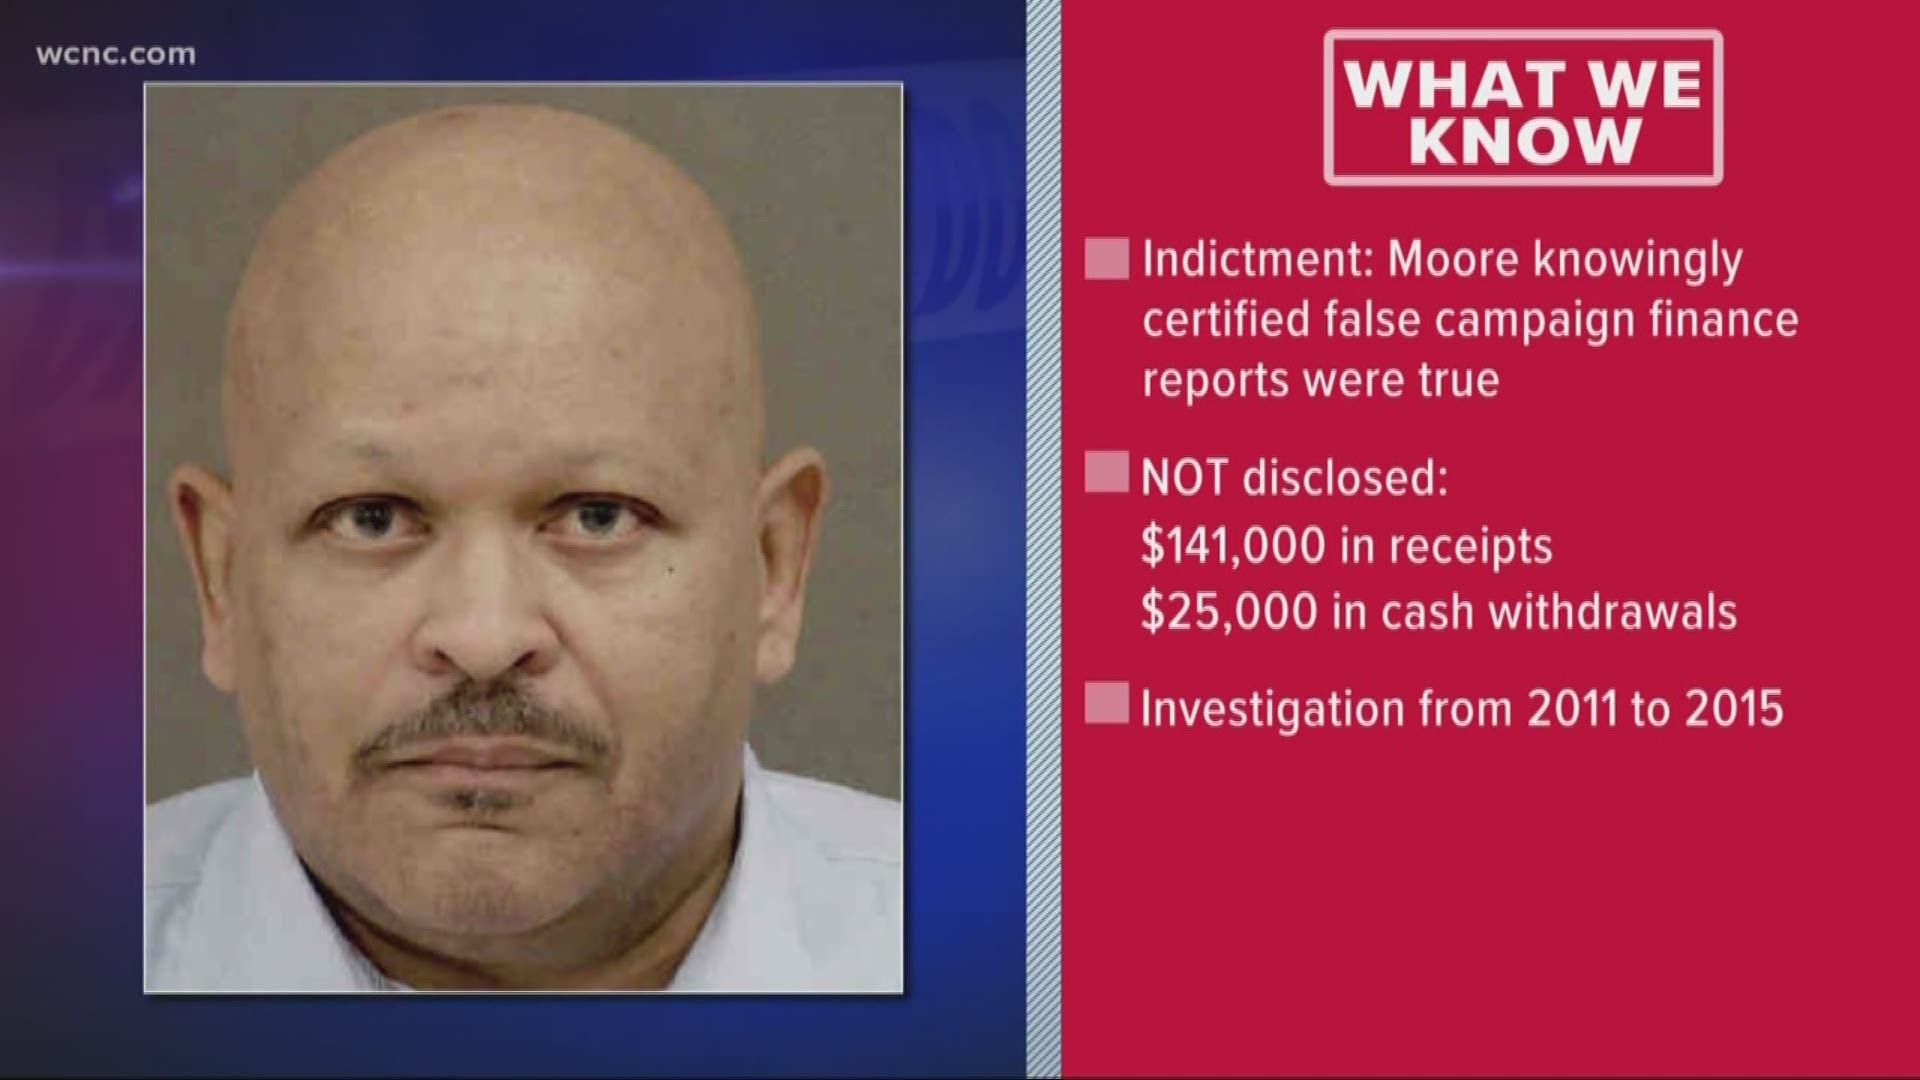 Moore was indicted by a Mecklenburg County grand jury on Monday on nine felony charges connected with filing of false campaign finance disclosure reports ranging from 2011 to 2015.